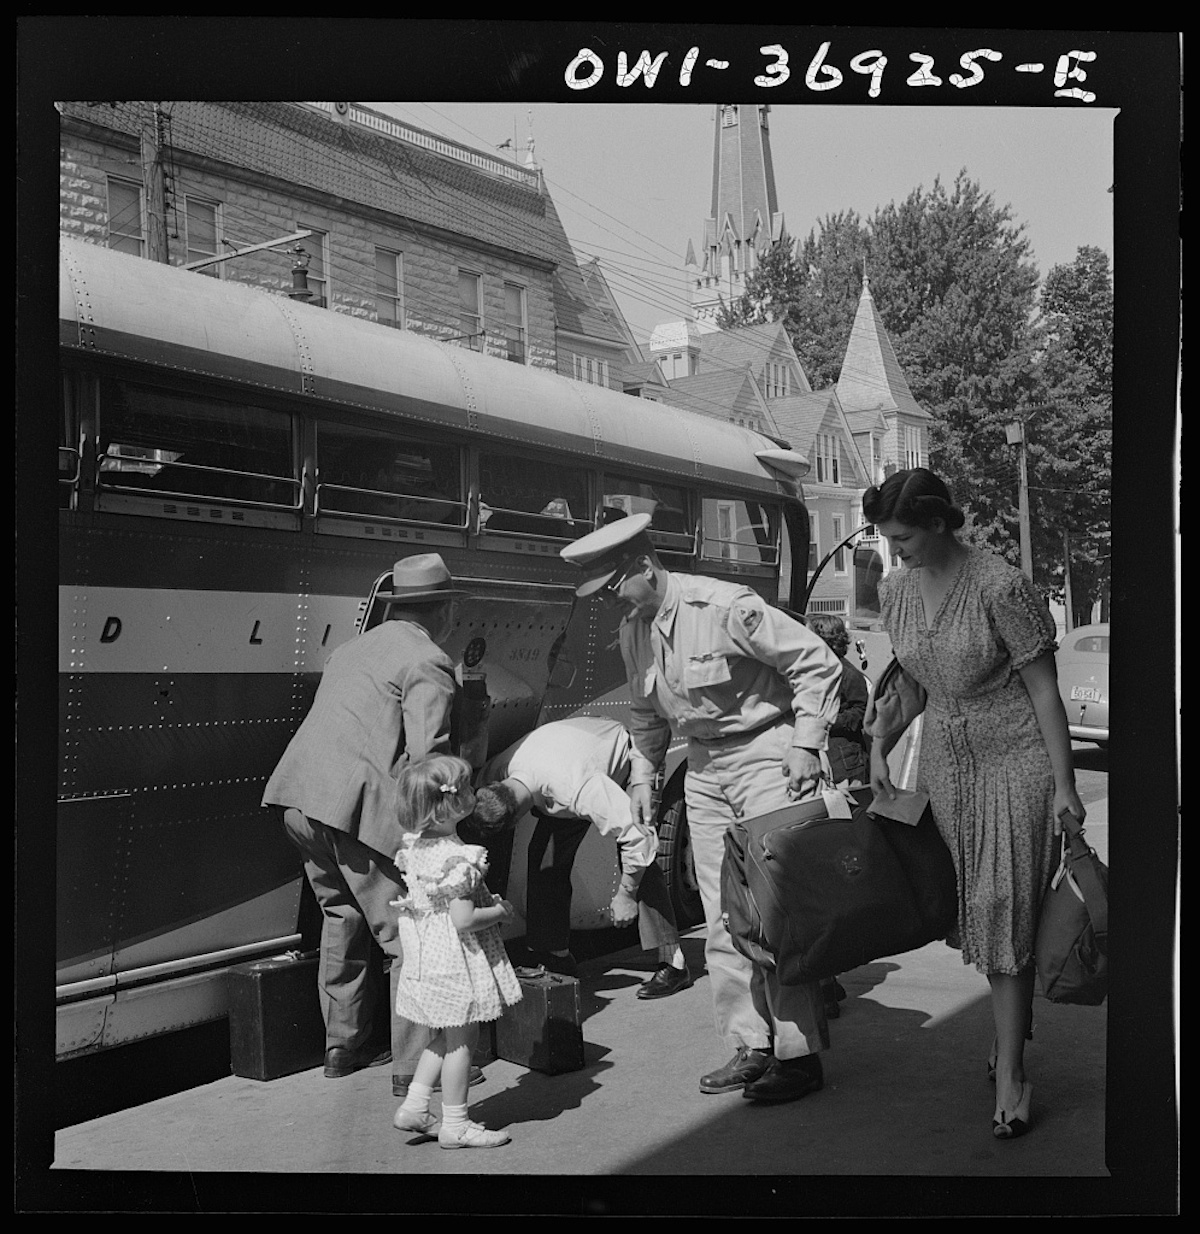 Passengers leaving a Greyhound bus in a small town in Pennsylvania